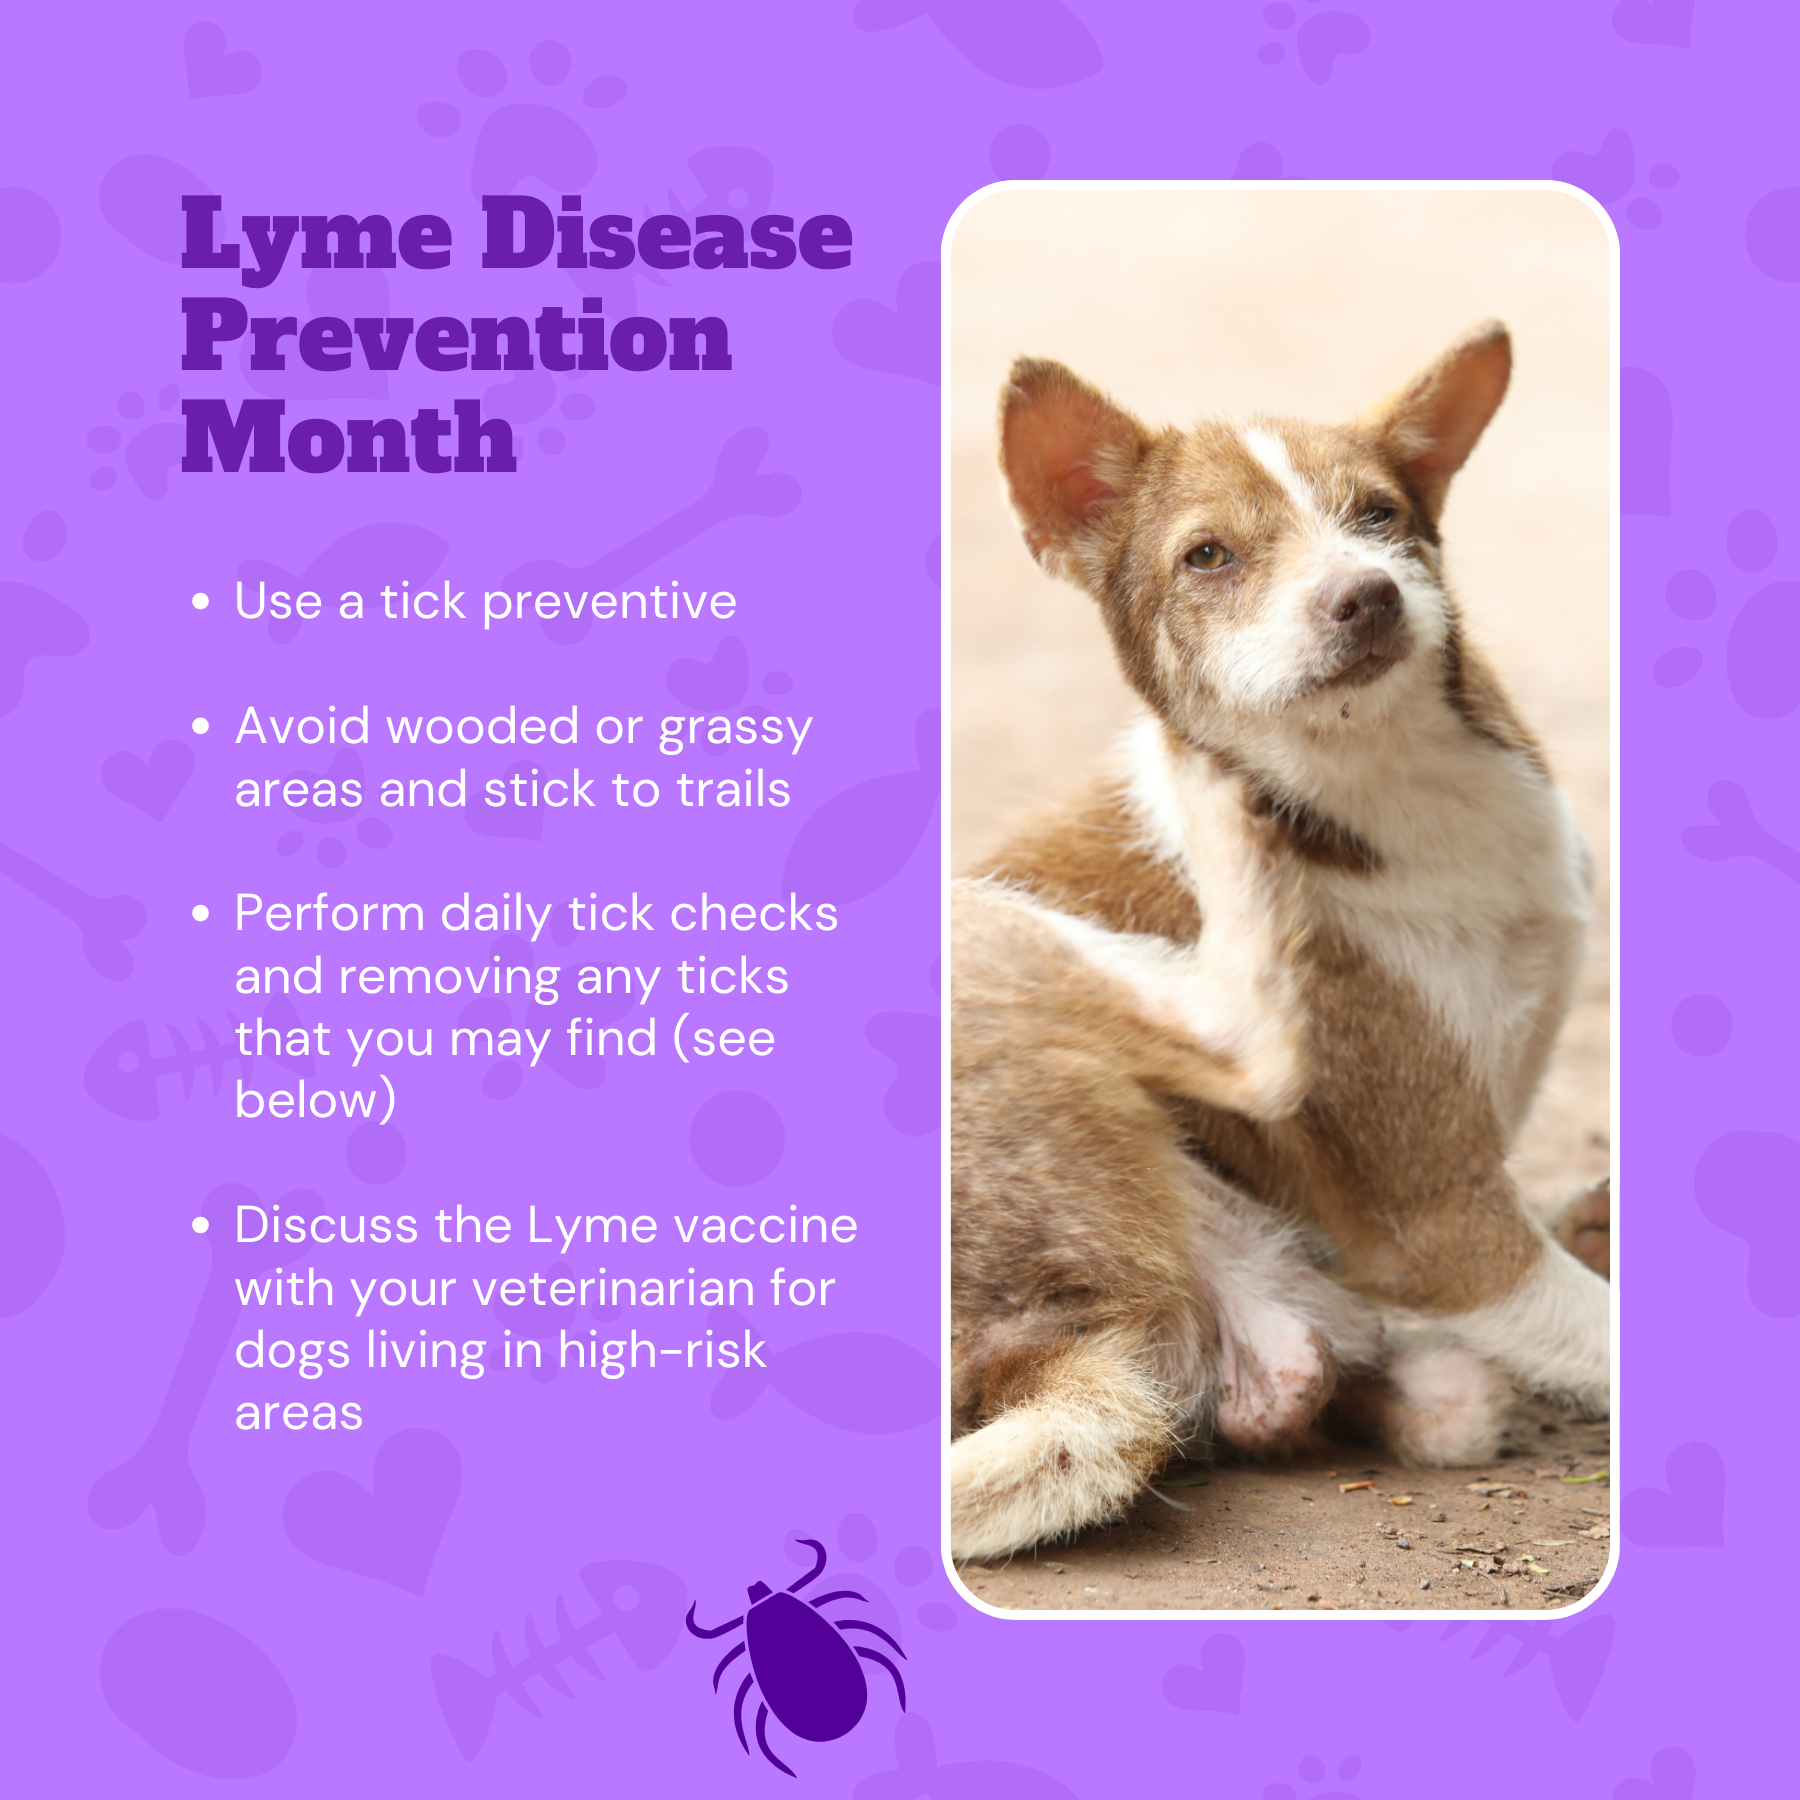 Lyme Disease Prevention Month